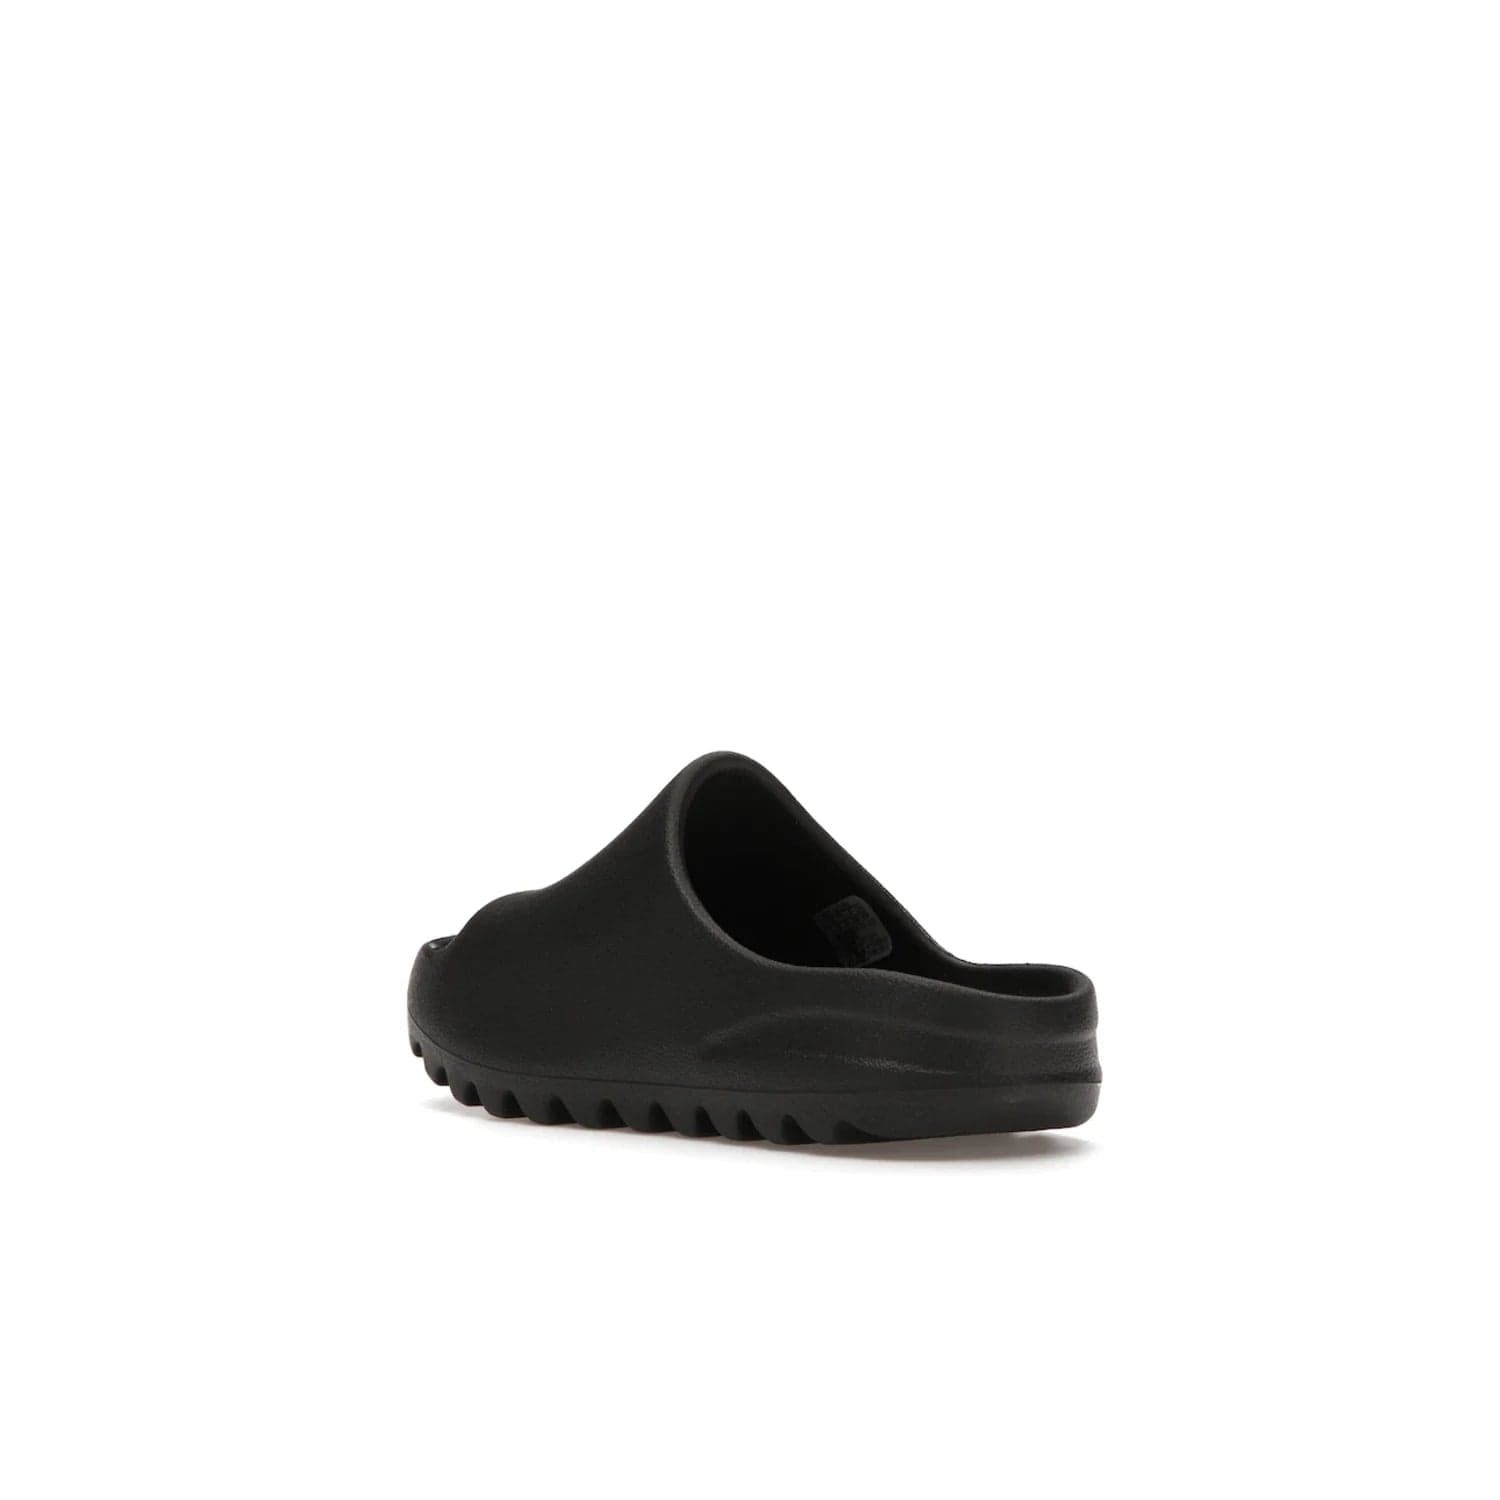 adidas Yeezy Slide Onyx (Kids) - Image 24 - Only at www.BallersClubKickz.com - adidas Yeezy Slide Onyx (Kids): Comfortable foam construction with textured surface and iconic three-stripe logo. Breathable, open-toe design and deep grooves for traction. Released in March 2021 at $50.